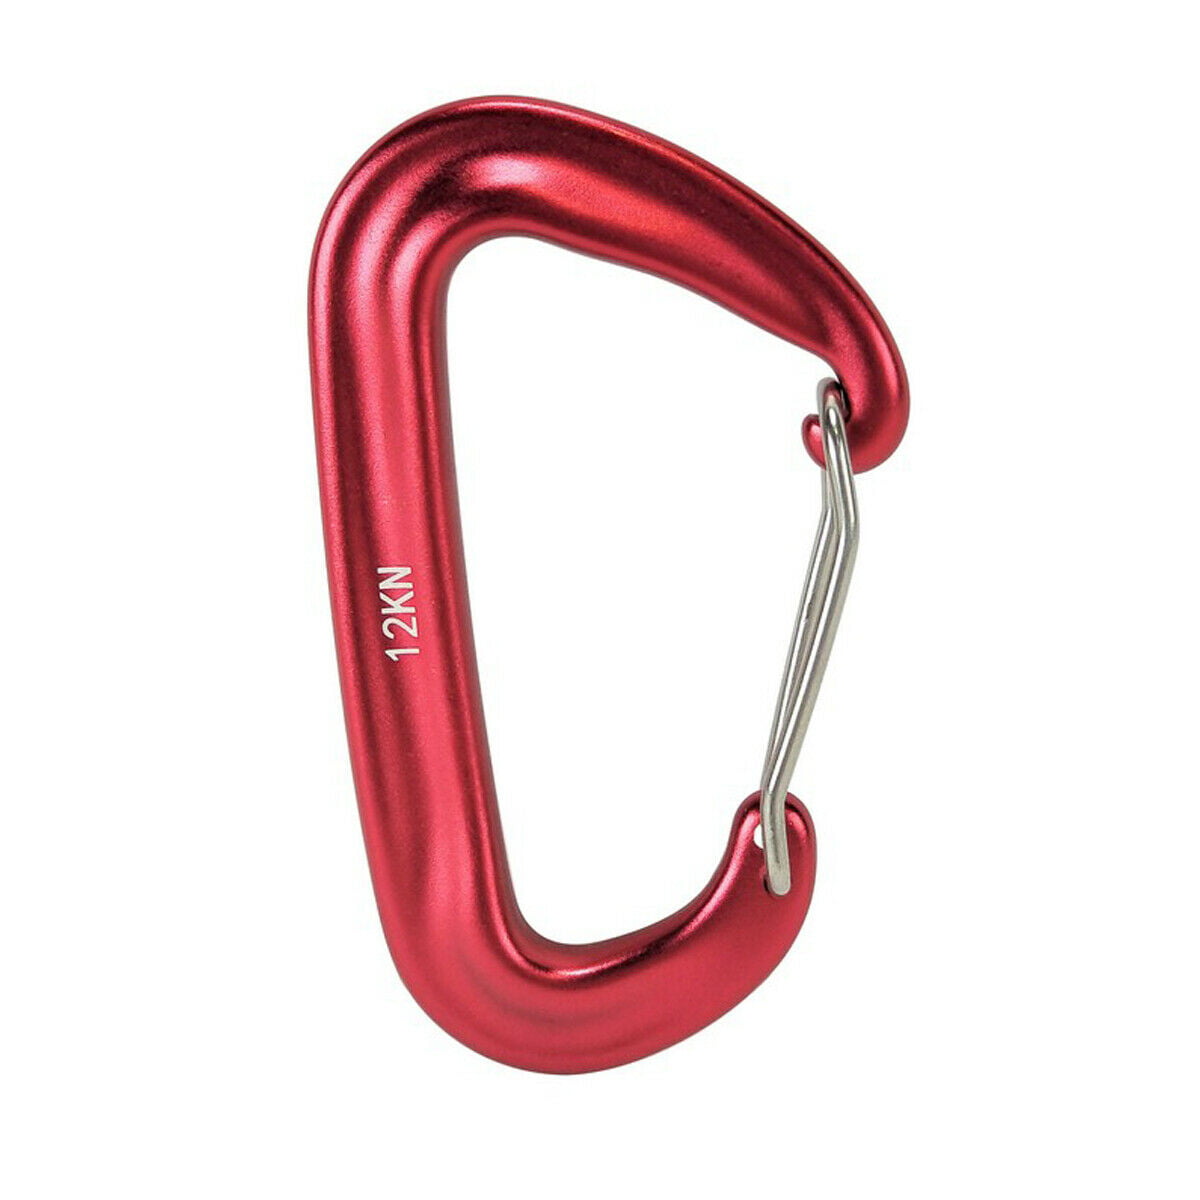 Stainless Steel Carabiner Clips D Ring Locking Strong Caribeaner Camping Hook CF 